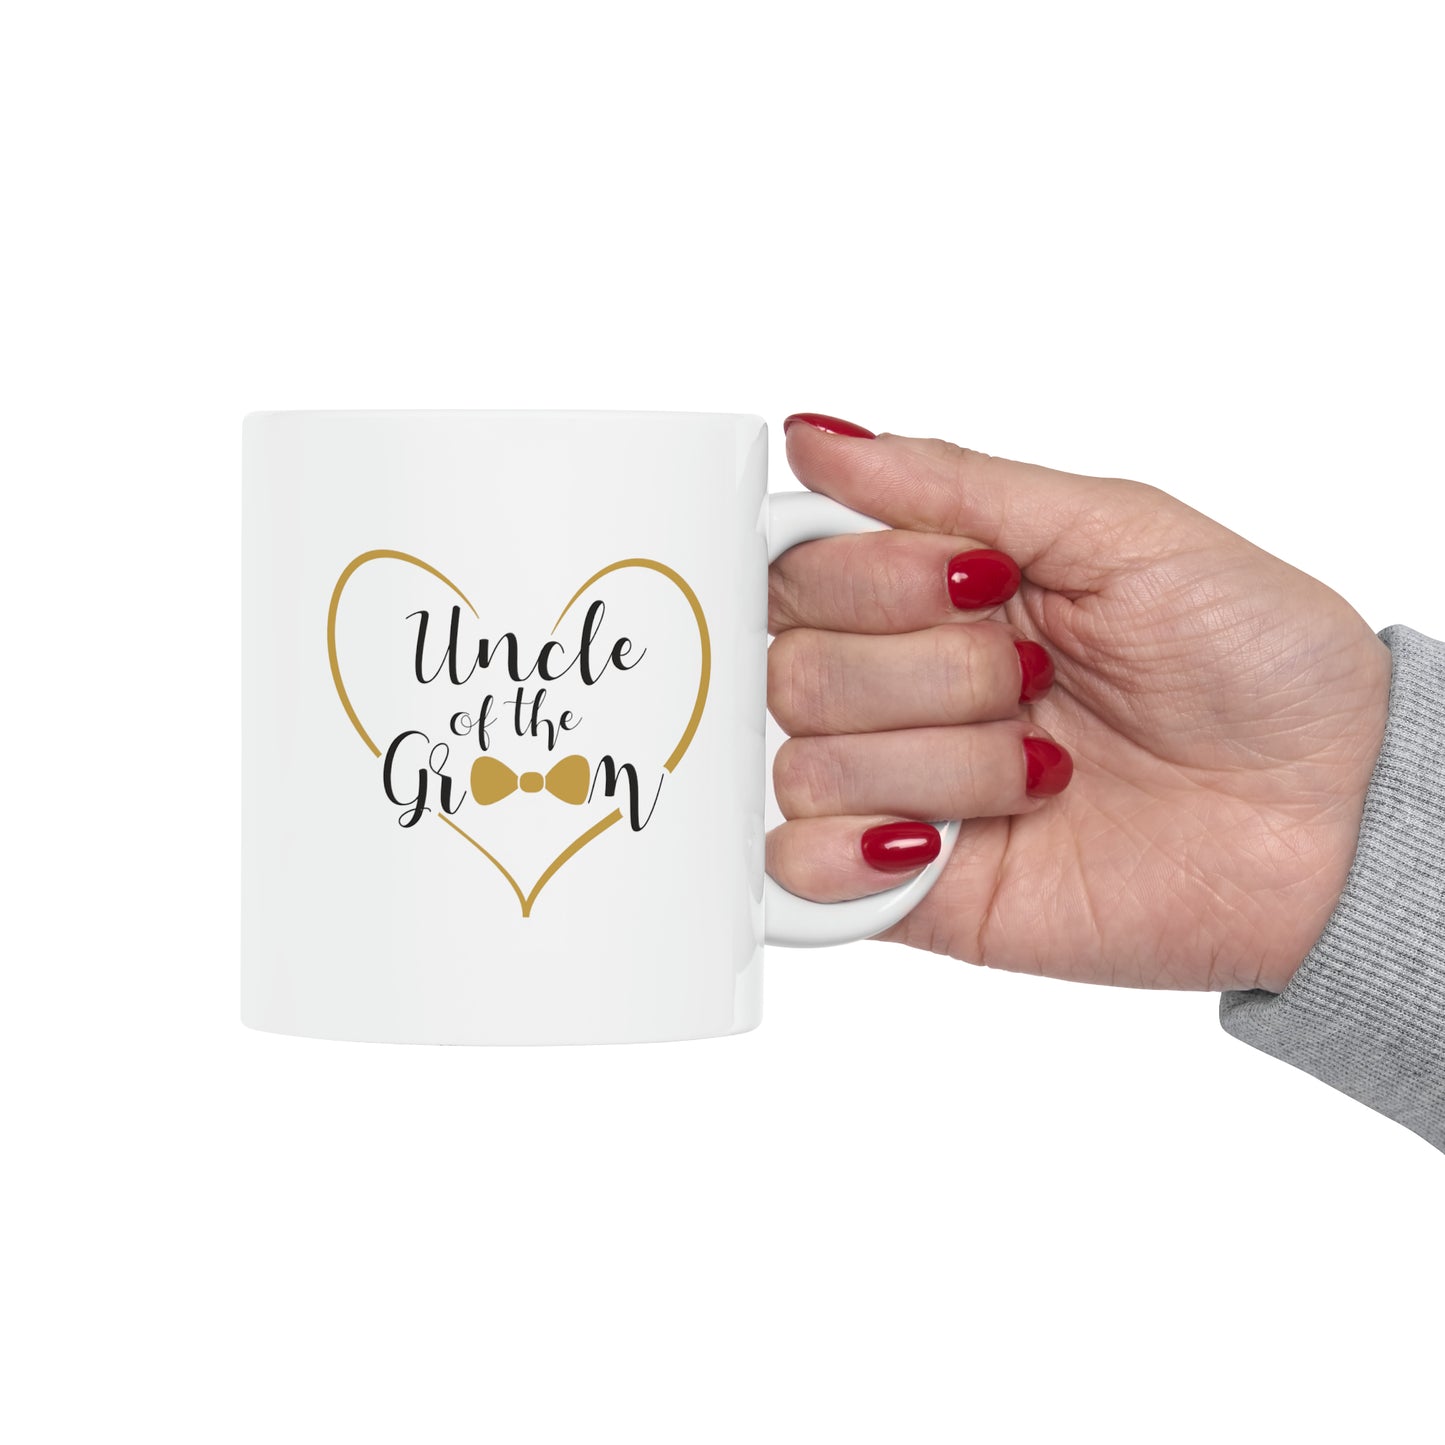 Uncle of the Groom Coffee Mug - Double Sided 11oz White Ceramic by TheGlassyLass.com